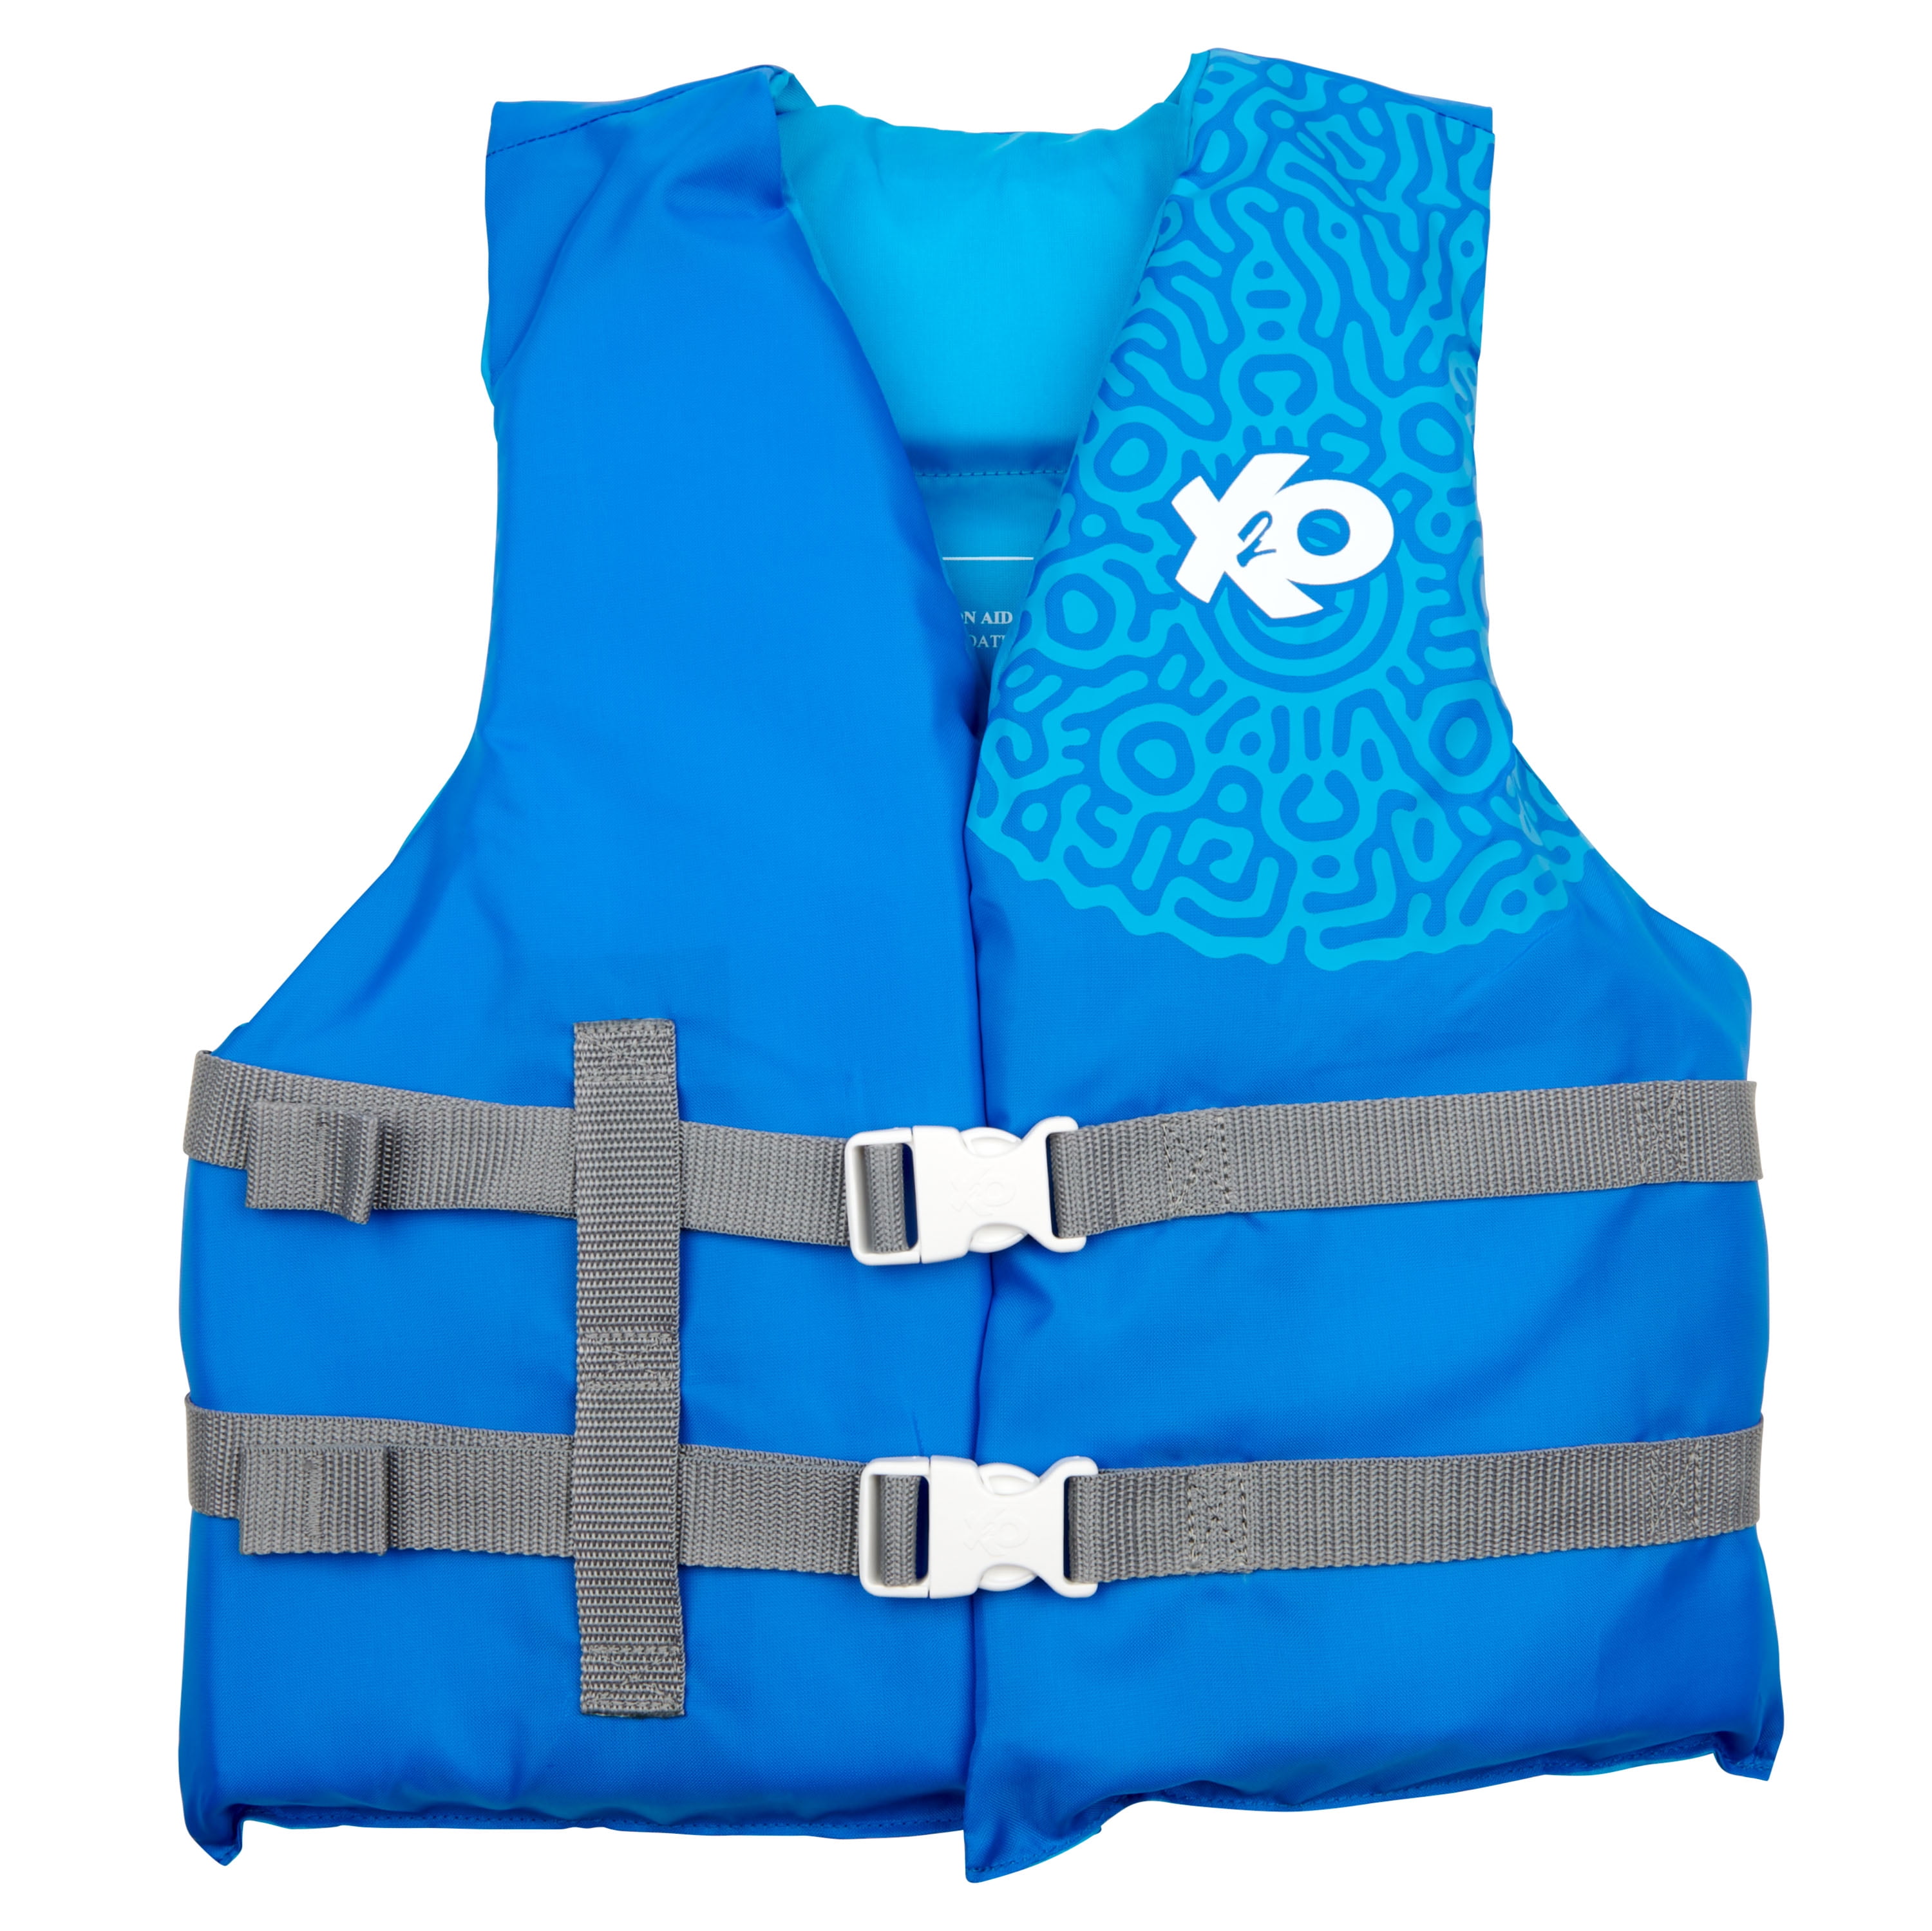 X2O Universal Youth Open-Sided Life Vest and Jacket, 50lbs - 90lbs, Blue Ocean Coral